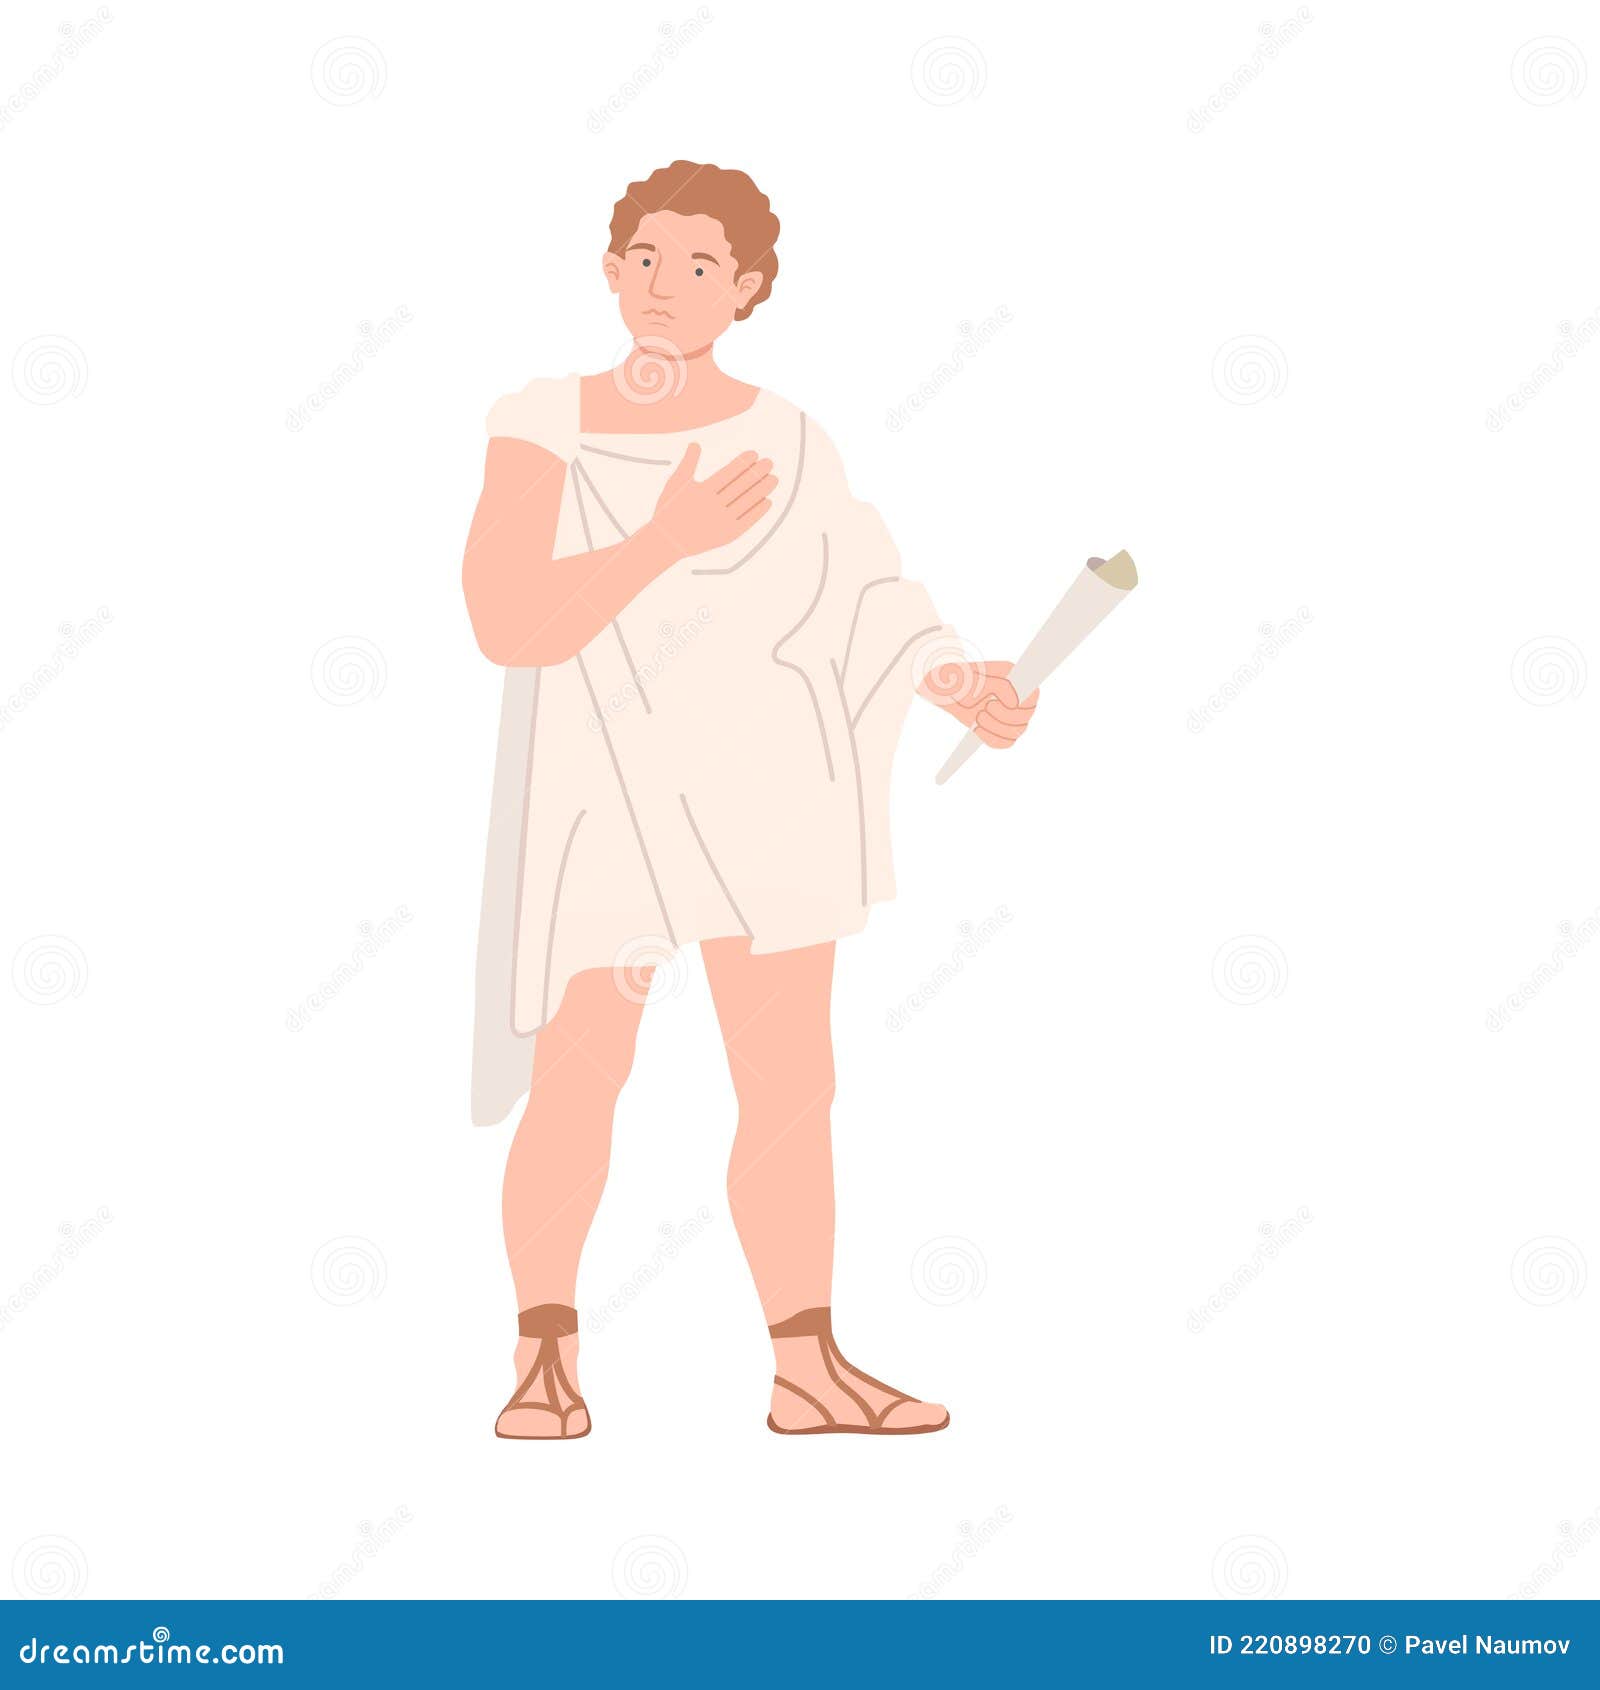 Young Male Roman Wearing Long Tunic and Sandals As Traditional Clothes ...